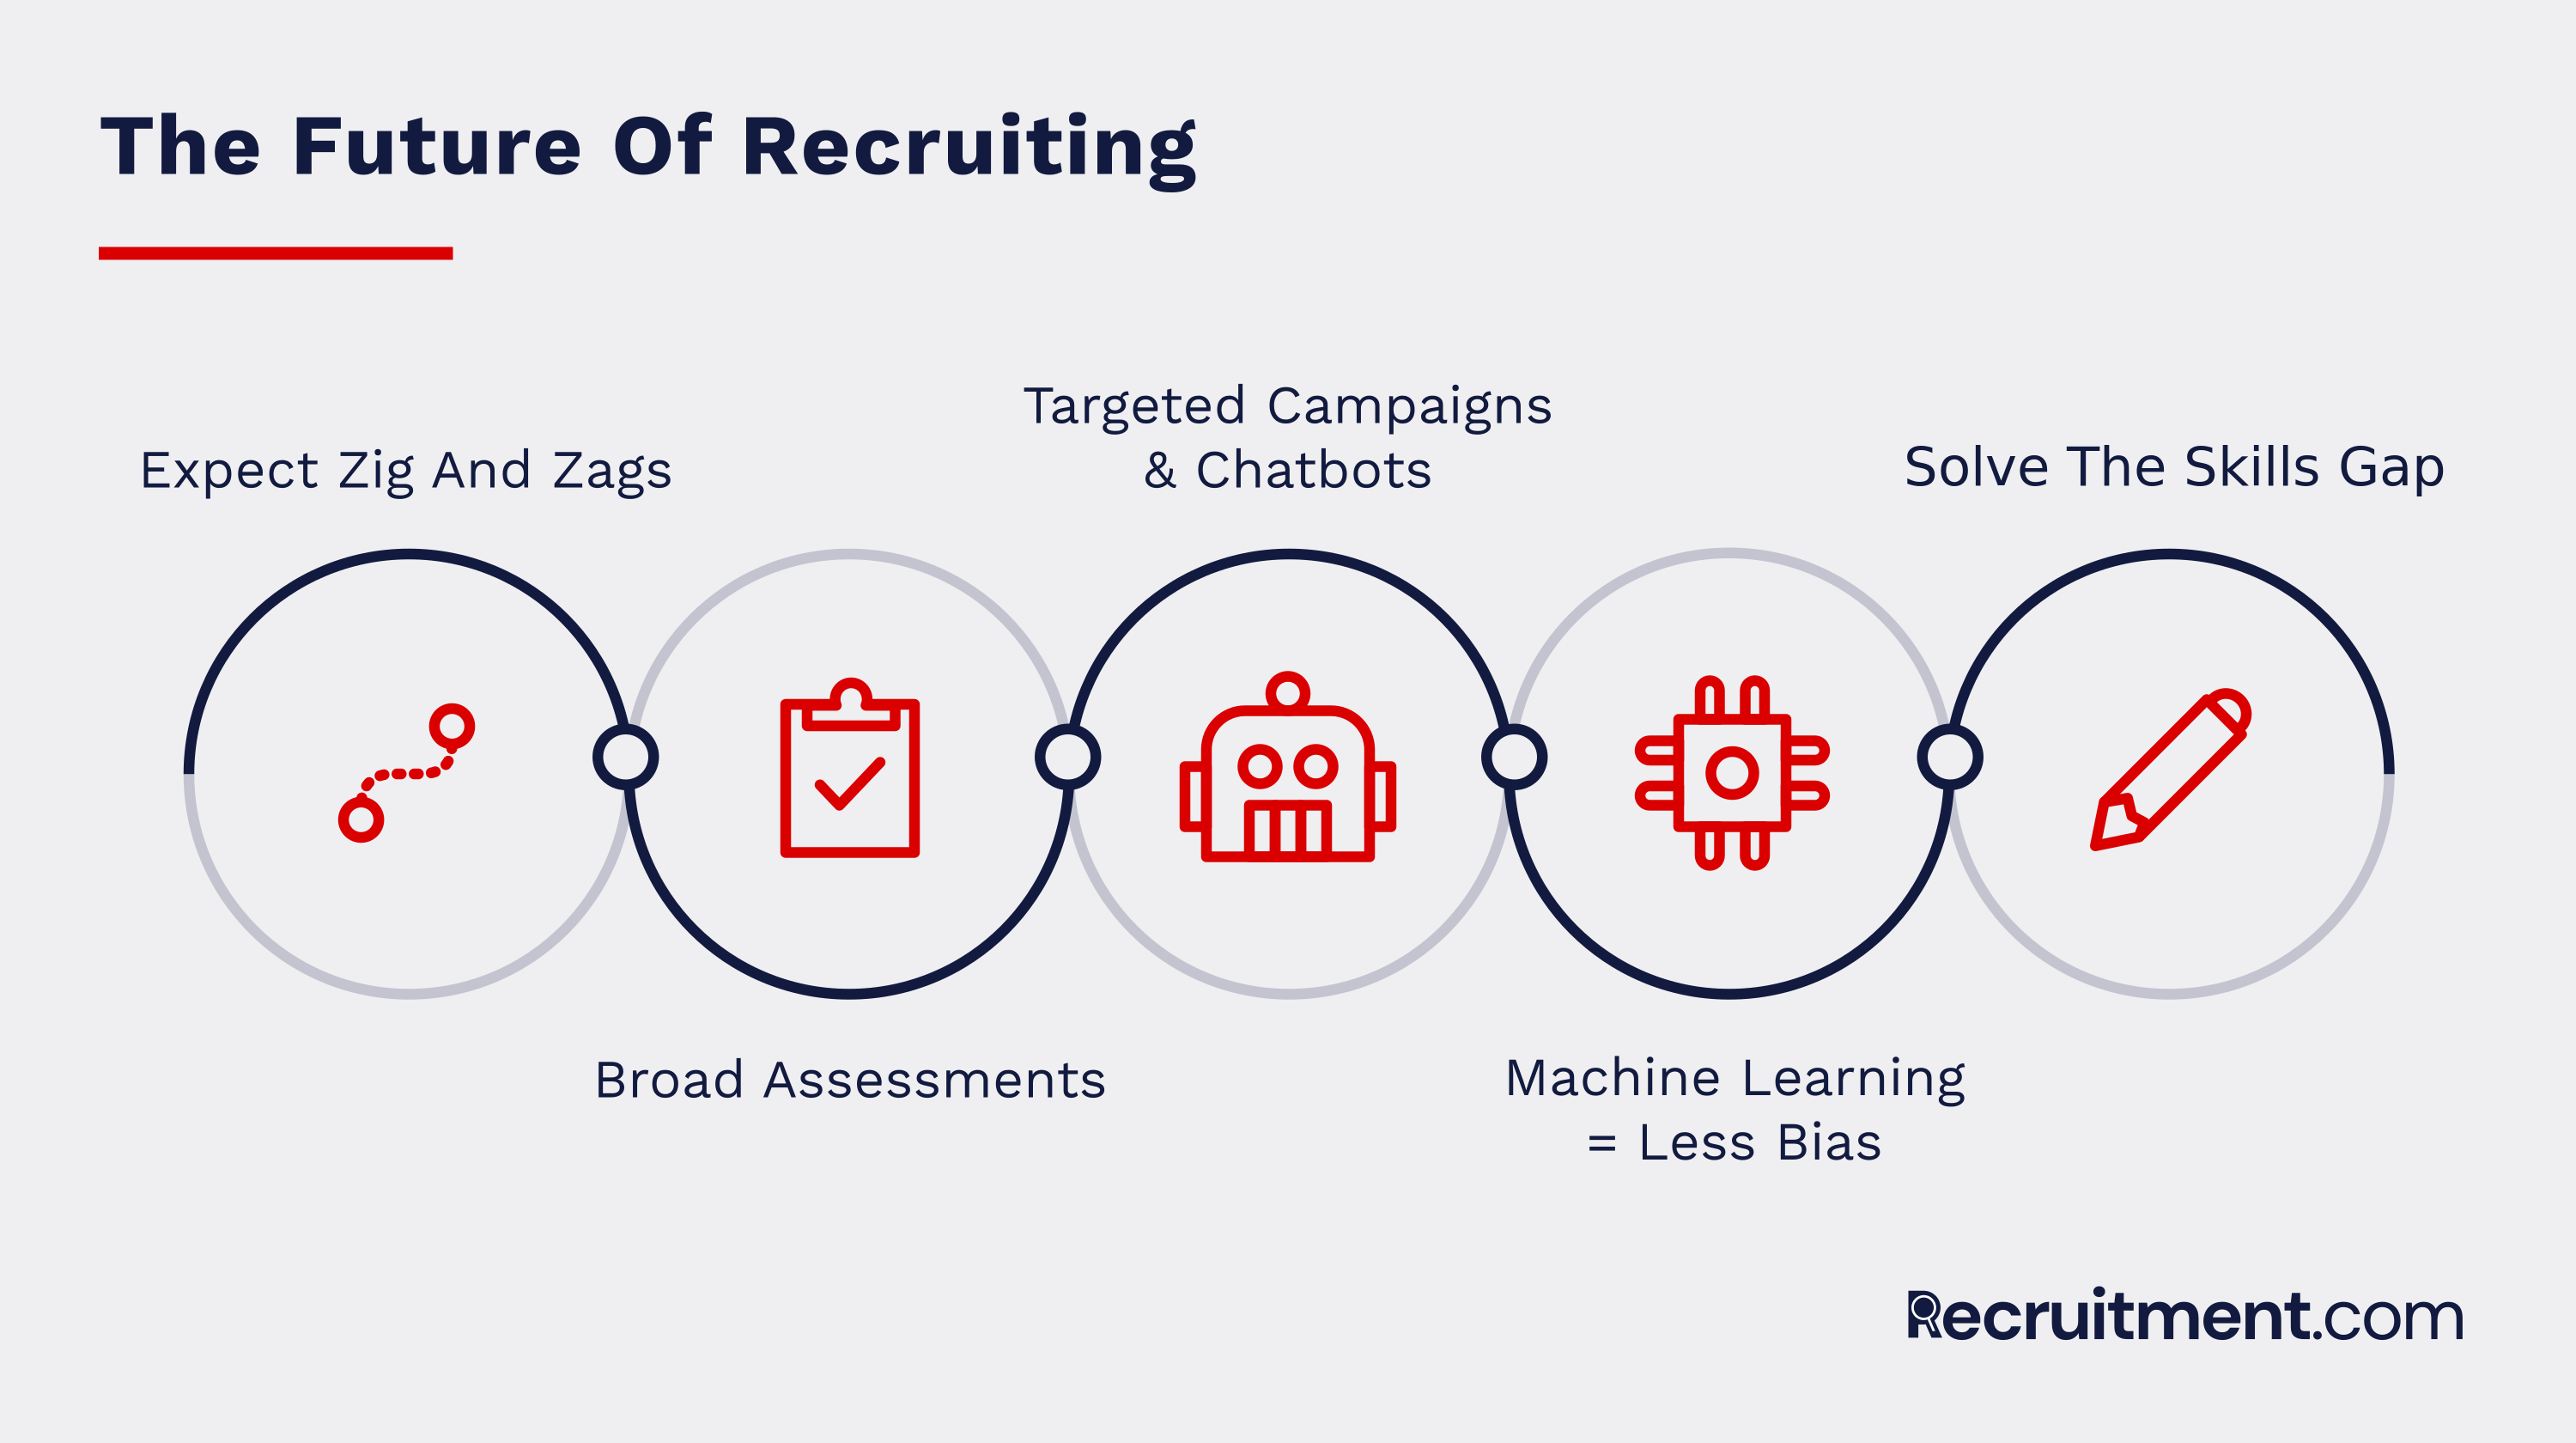 The Future Of Recruiting 5 Areas That Will Be Impacted